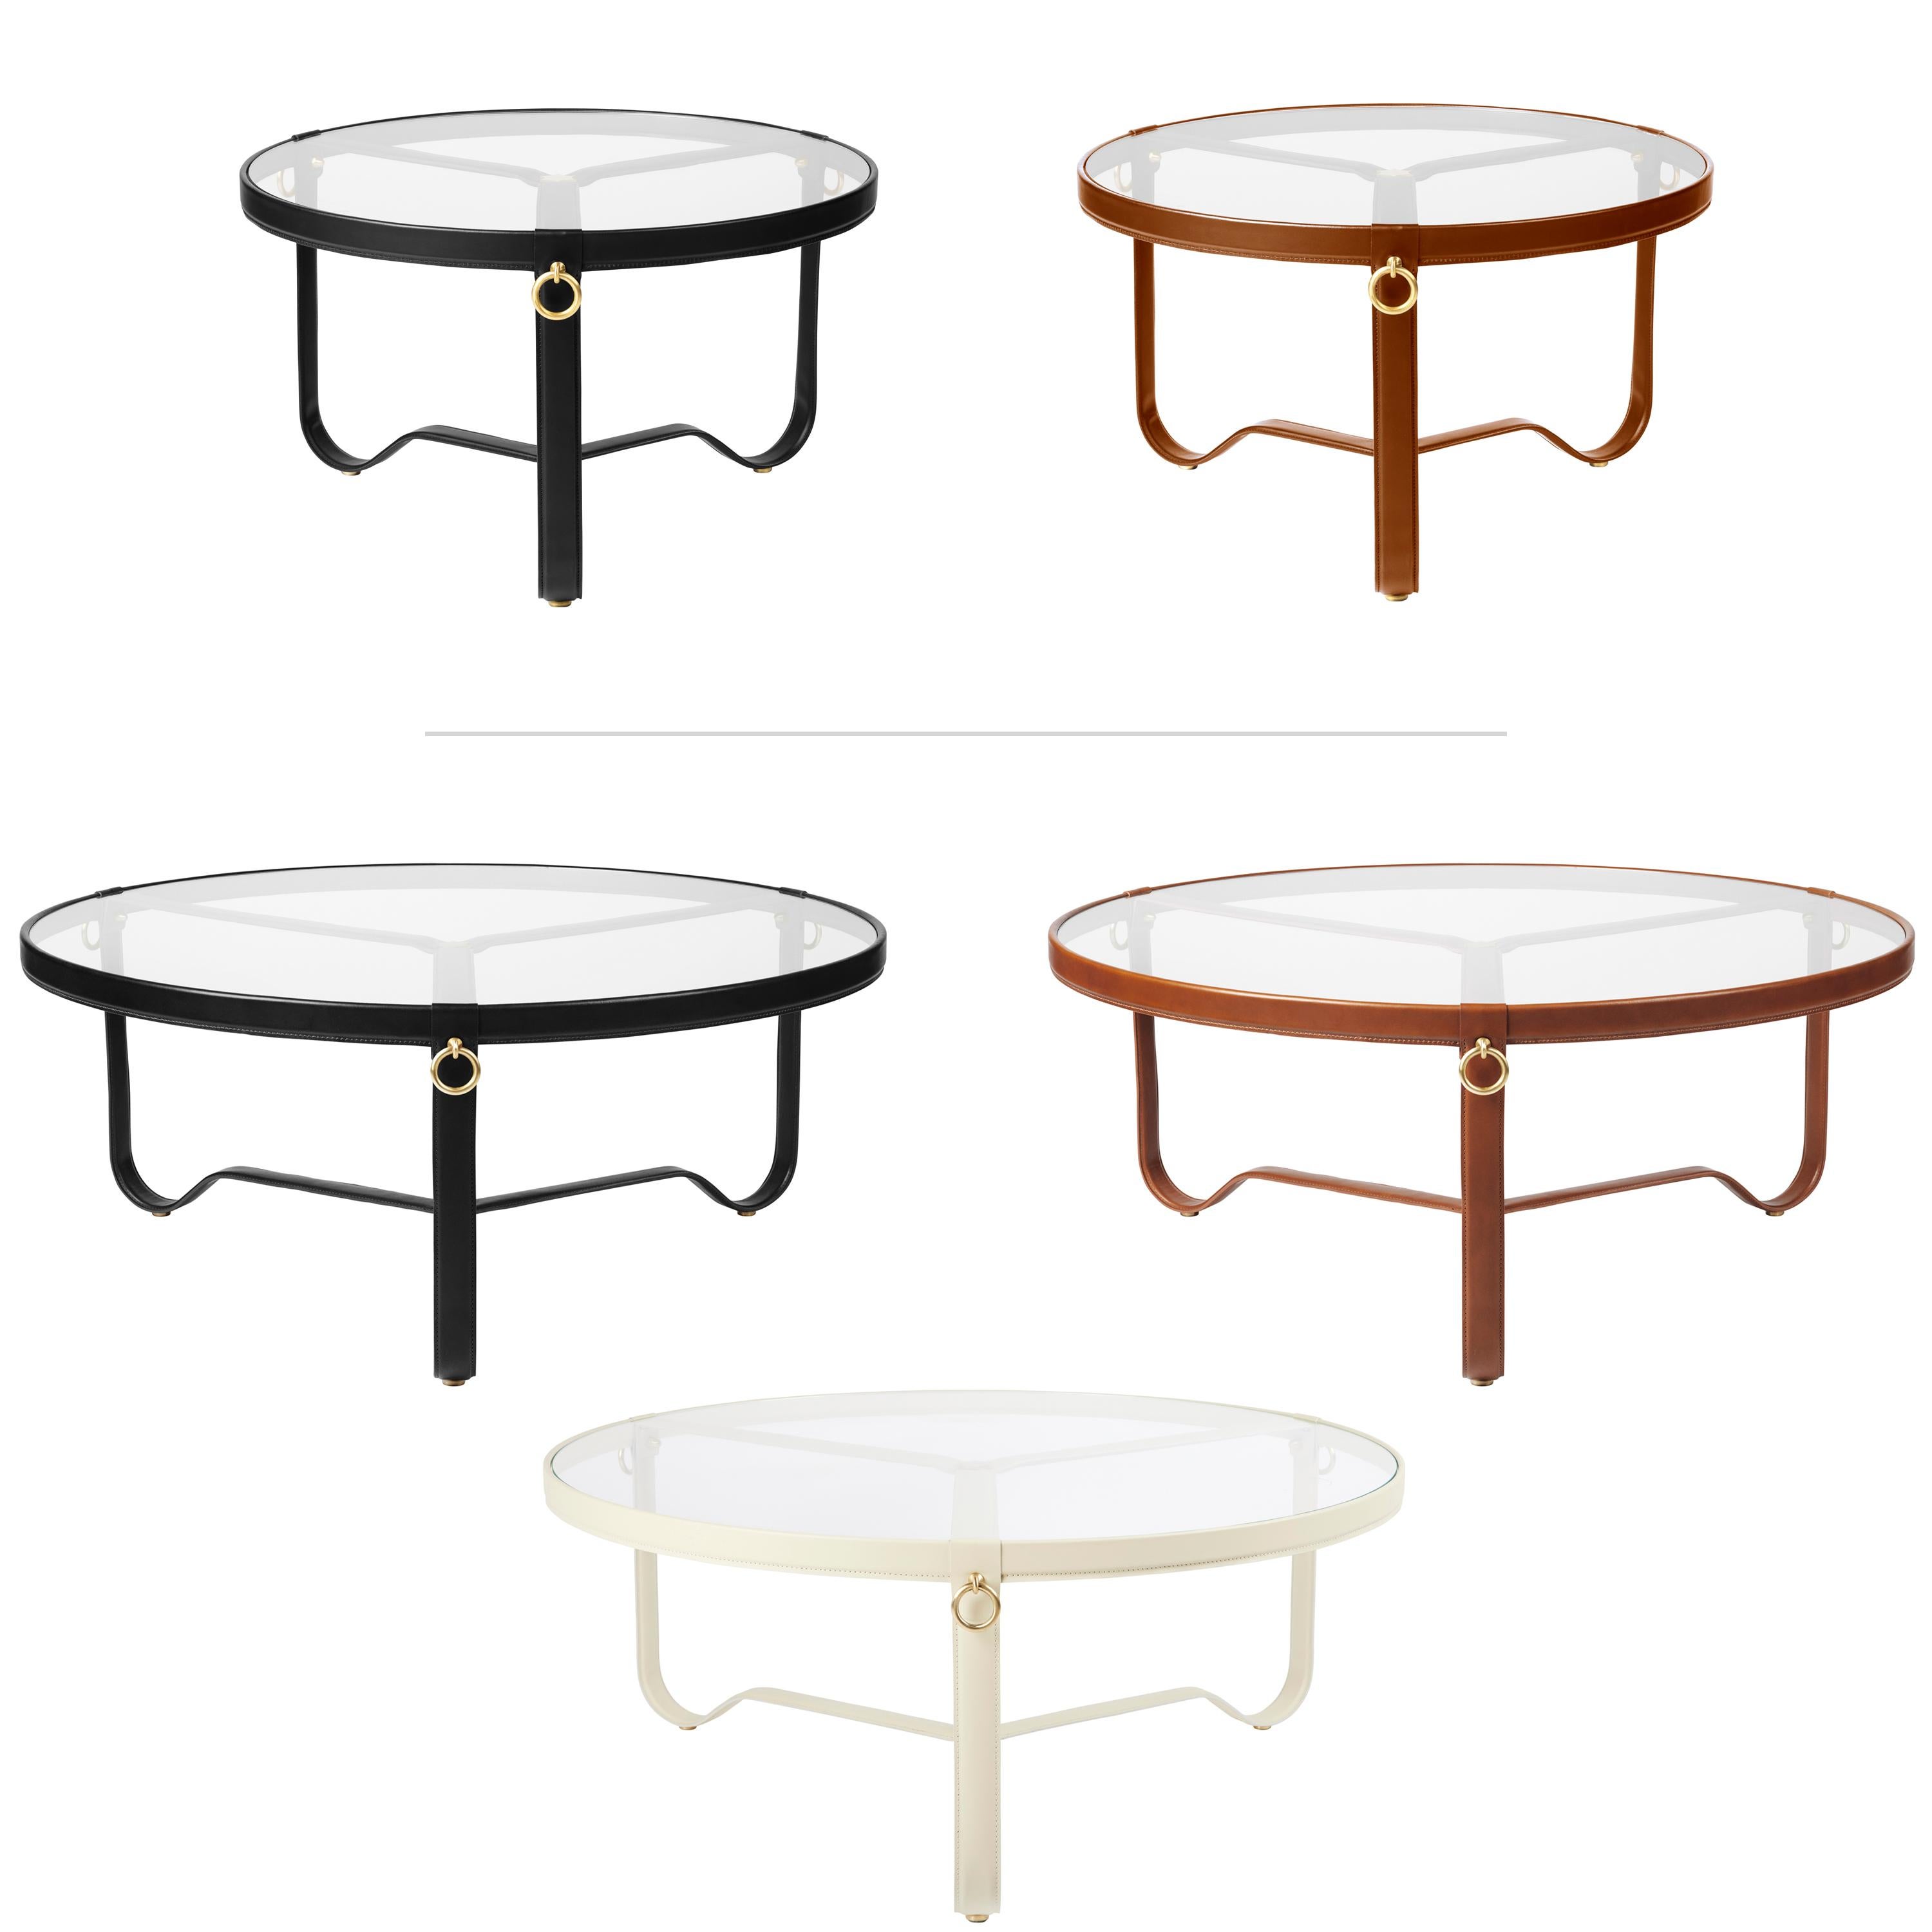 Contemporary Large Jacques Adnet 'Circulaire' Glass and Brown Leather Coffee Table for GUBI For Sale